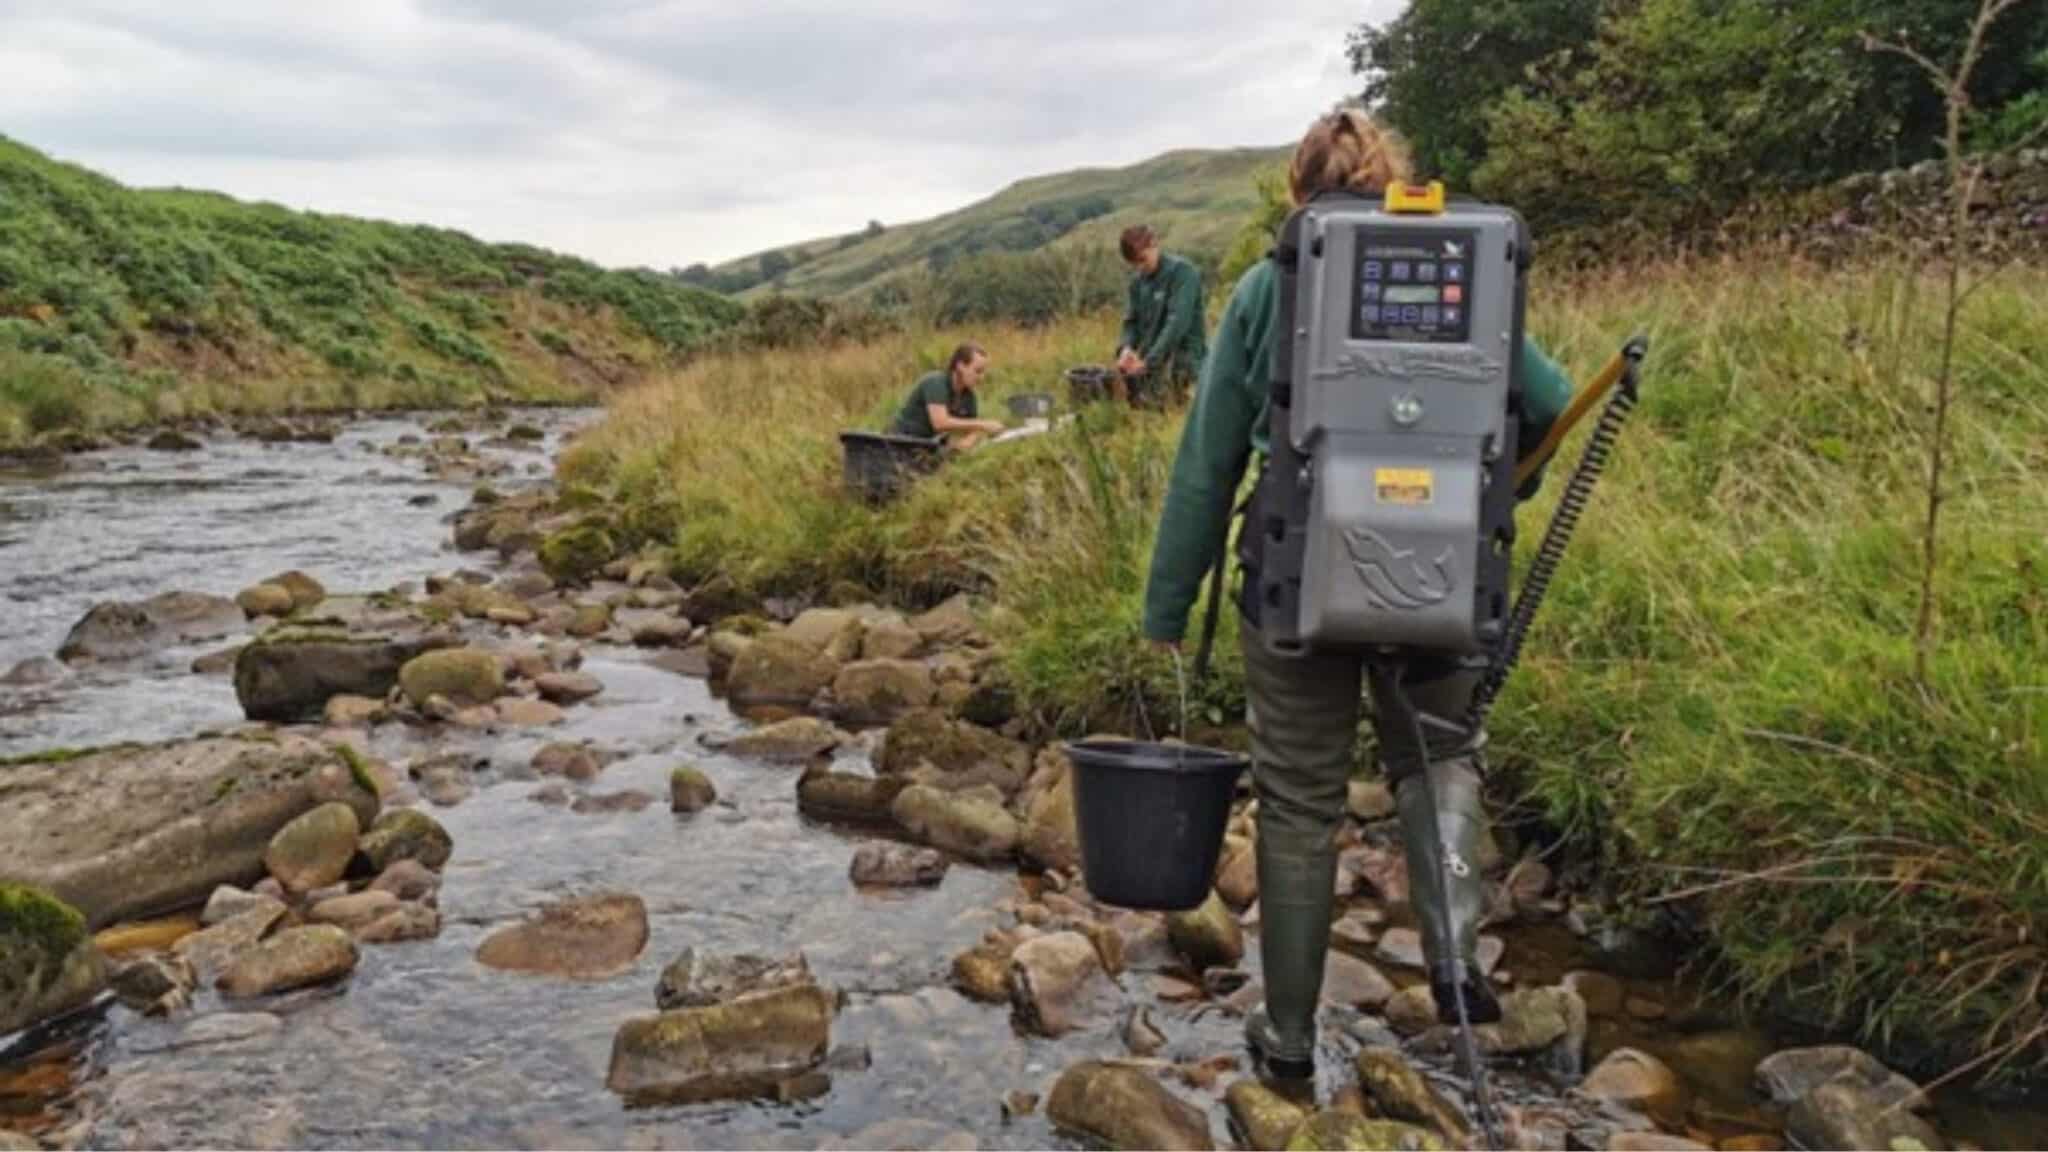 Fish monitoring: A PARRticularly dry summer